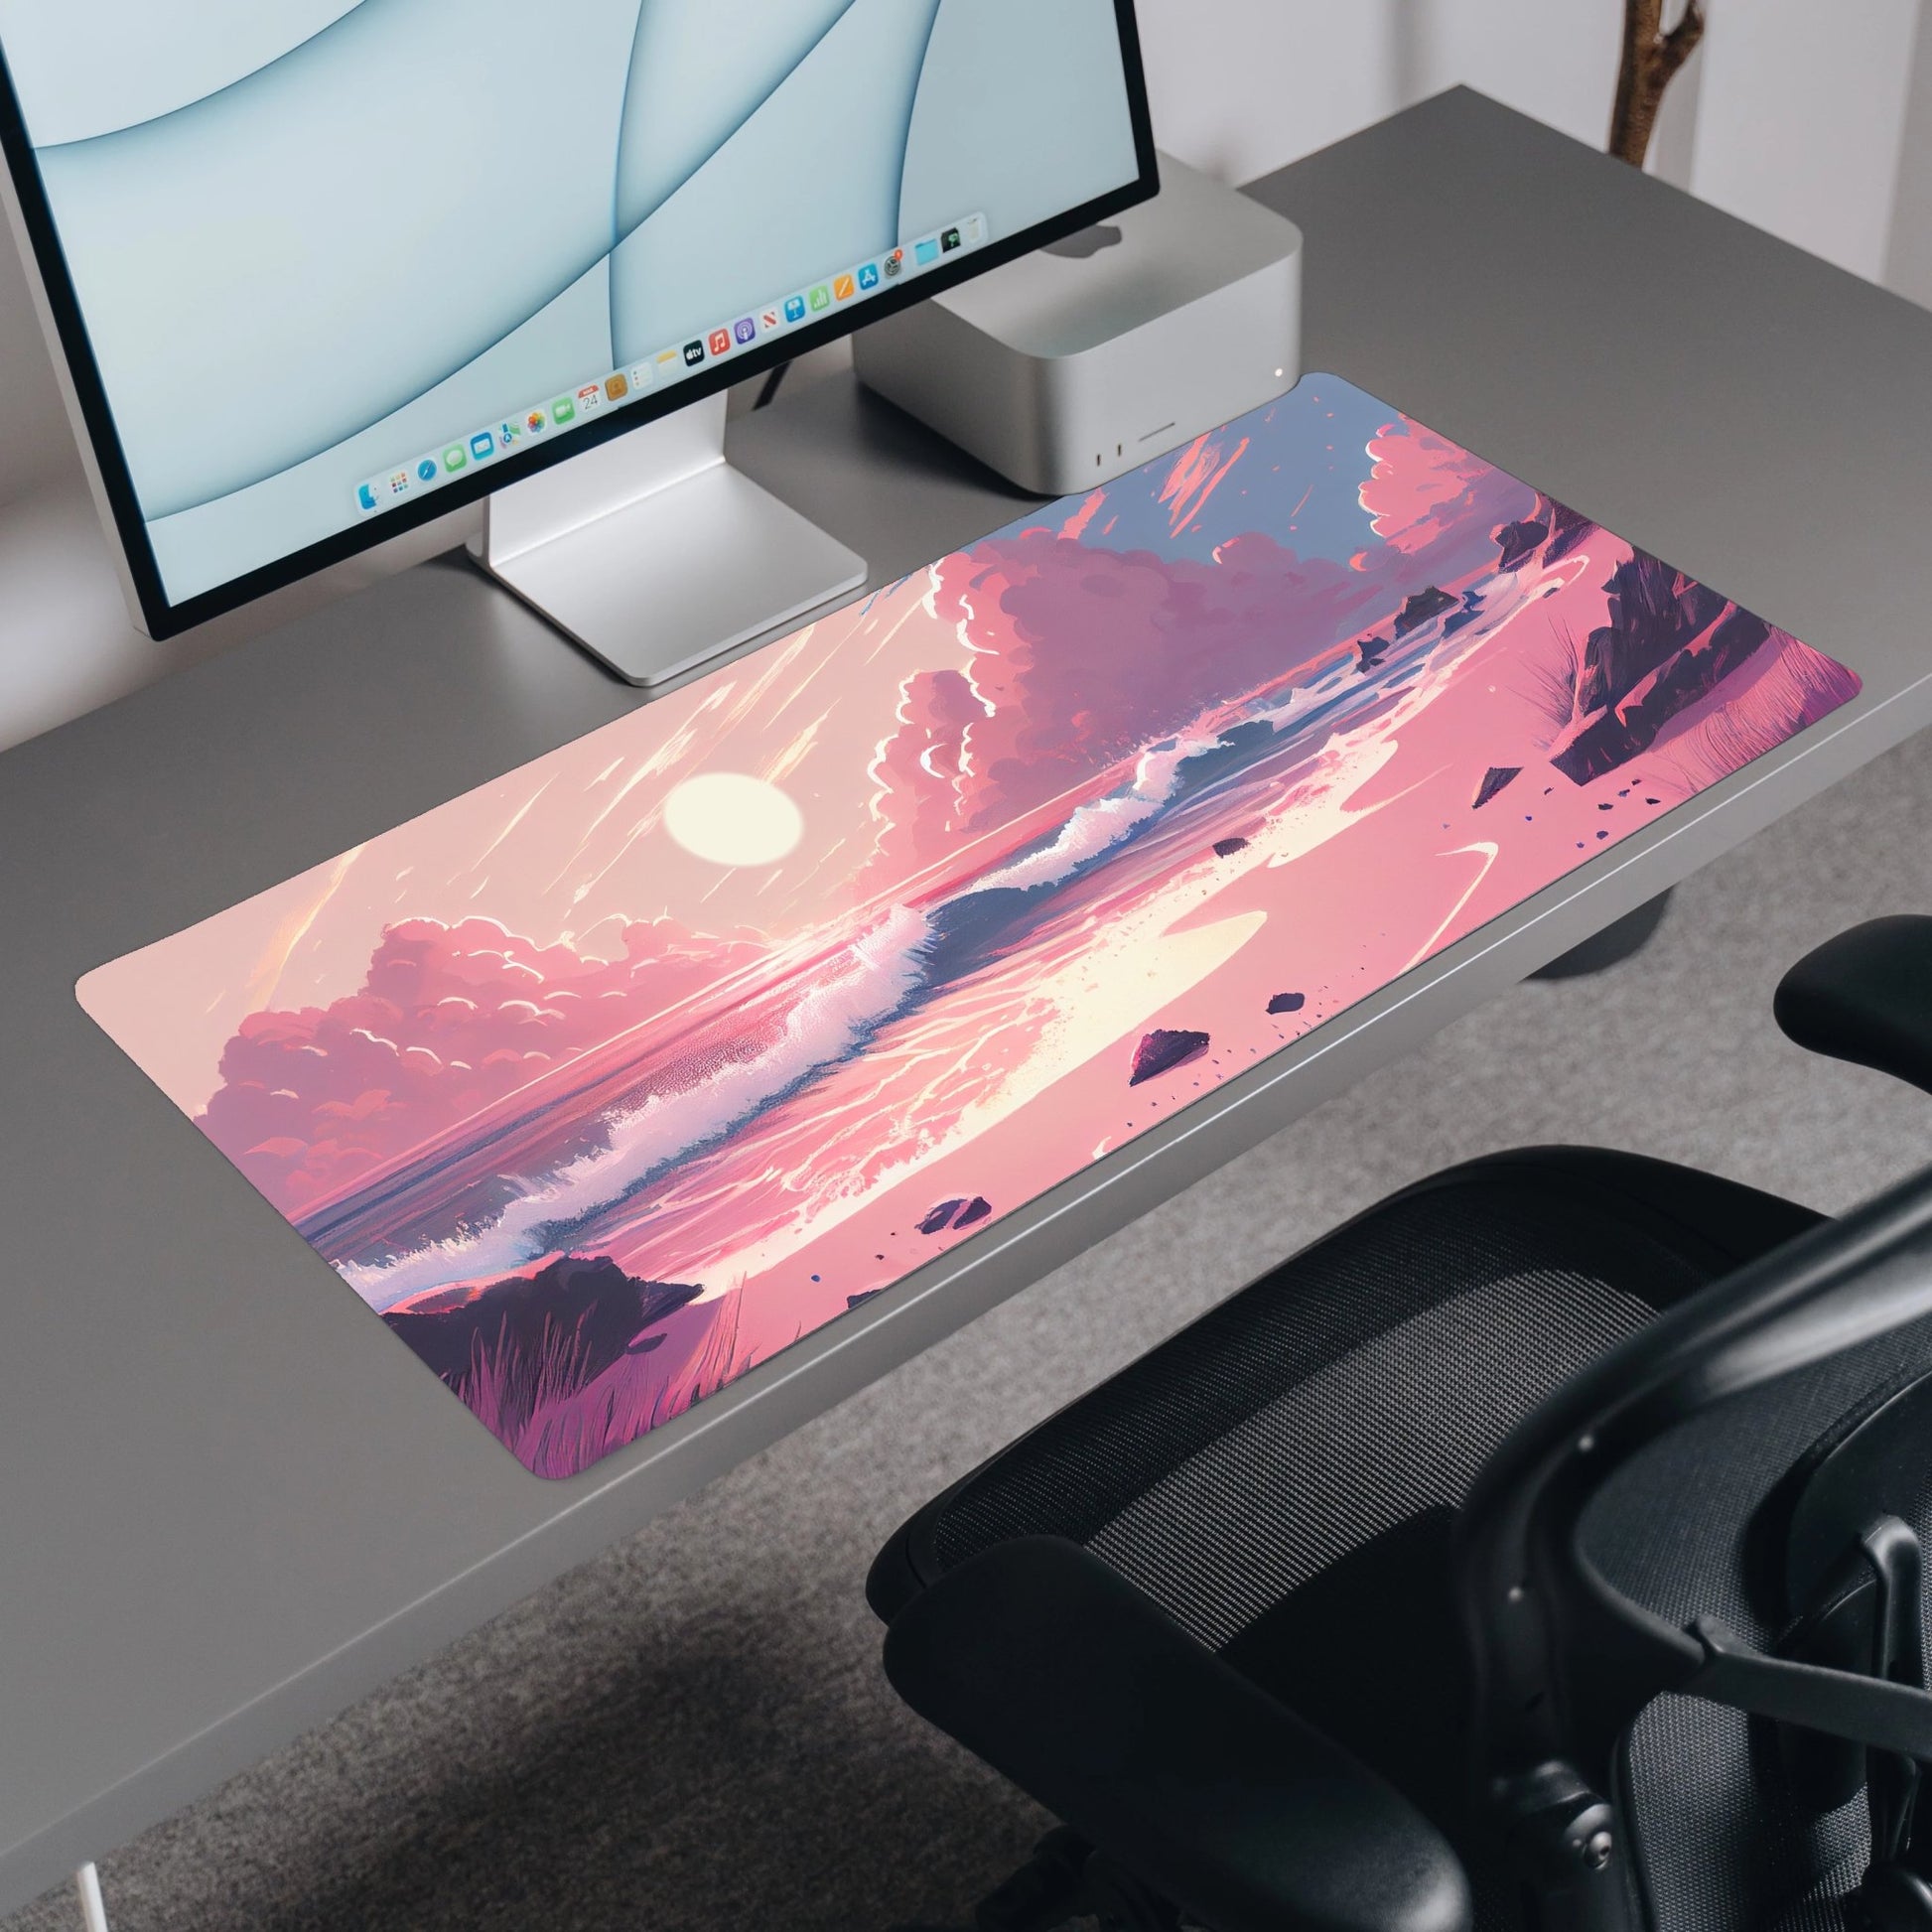 Branded Mouse Pads